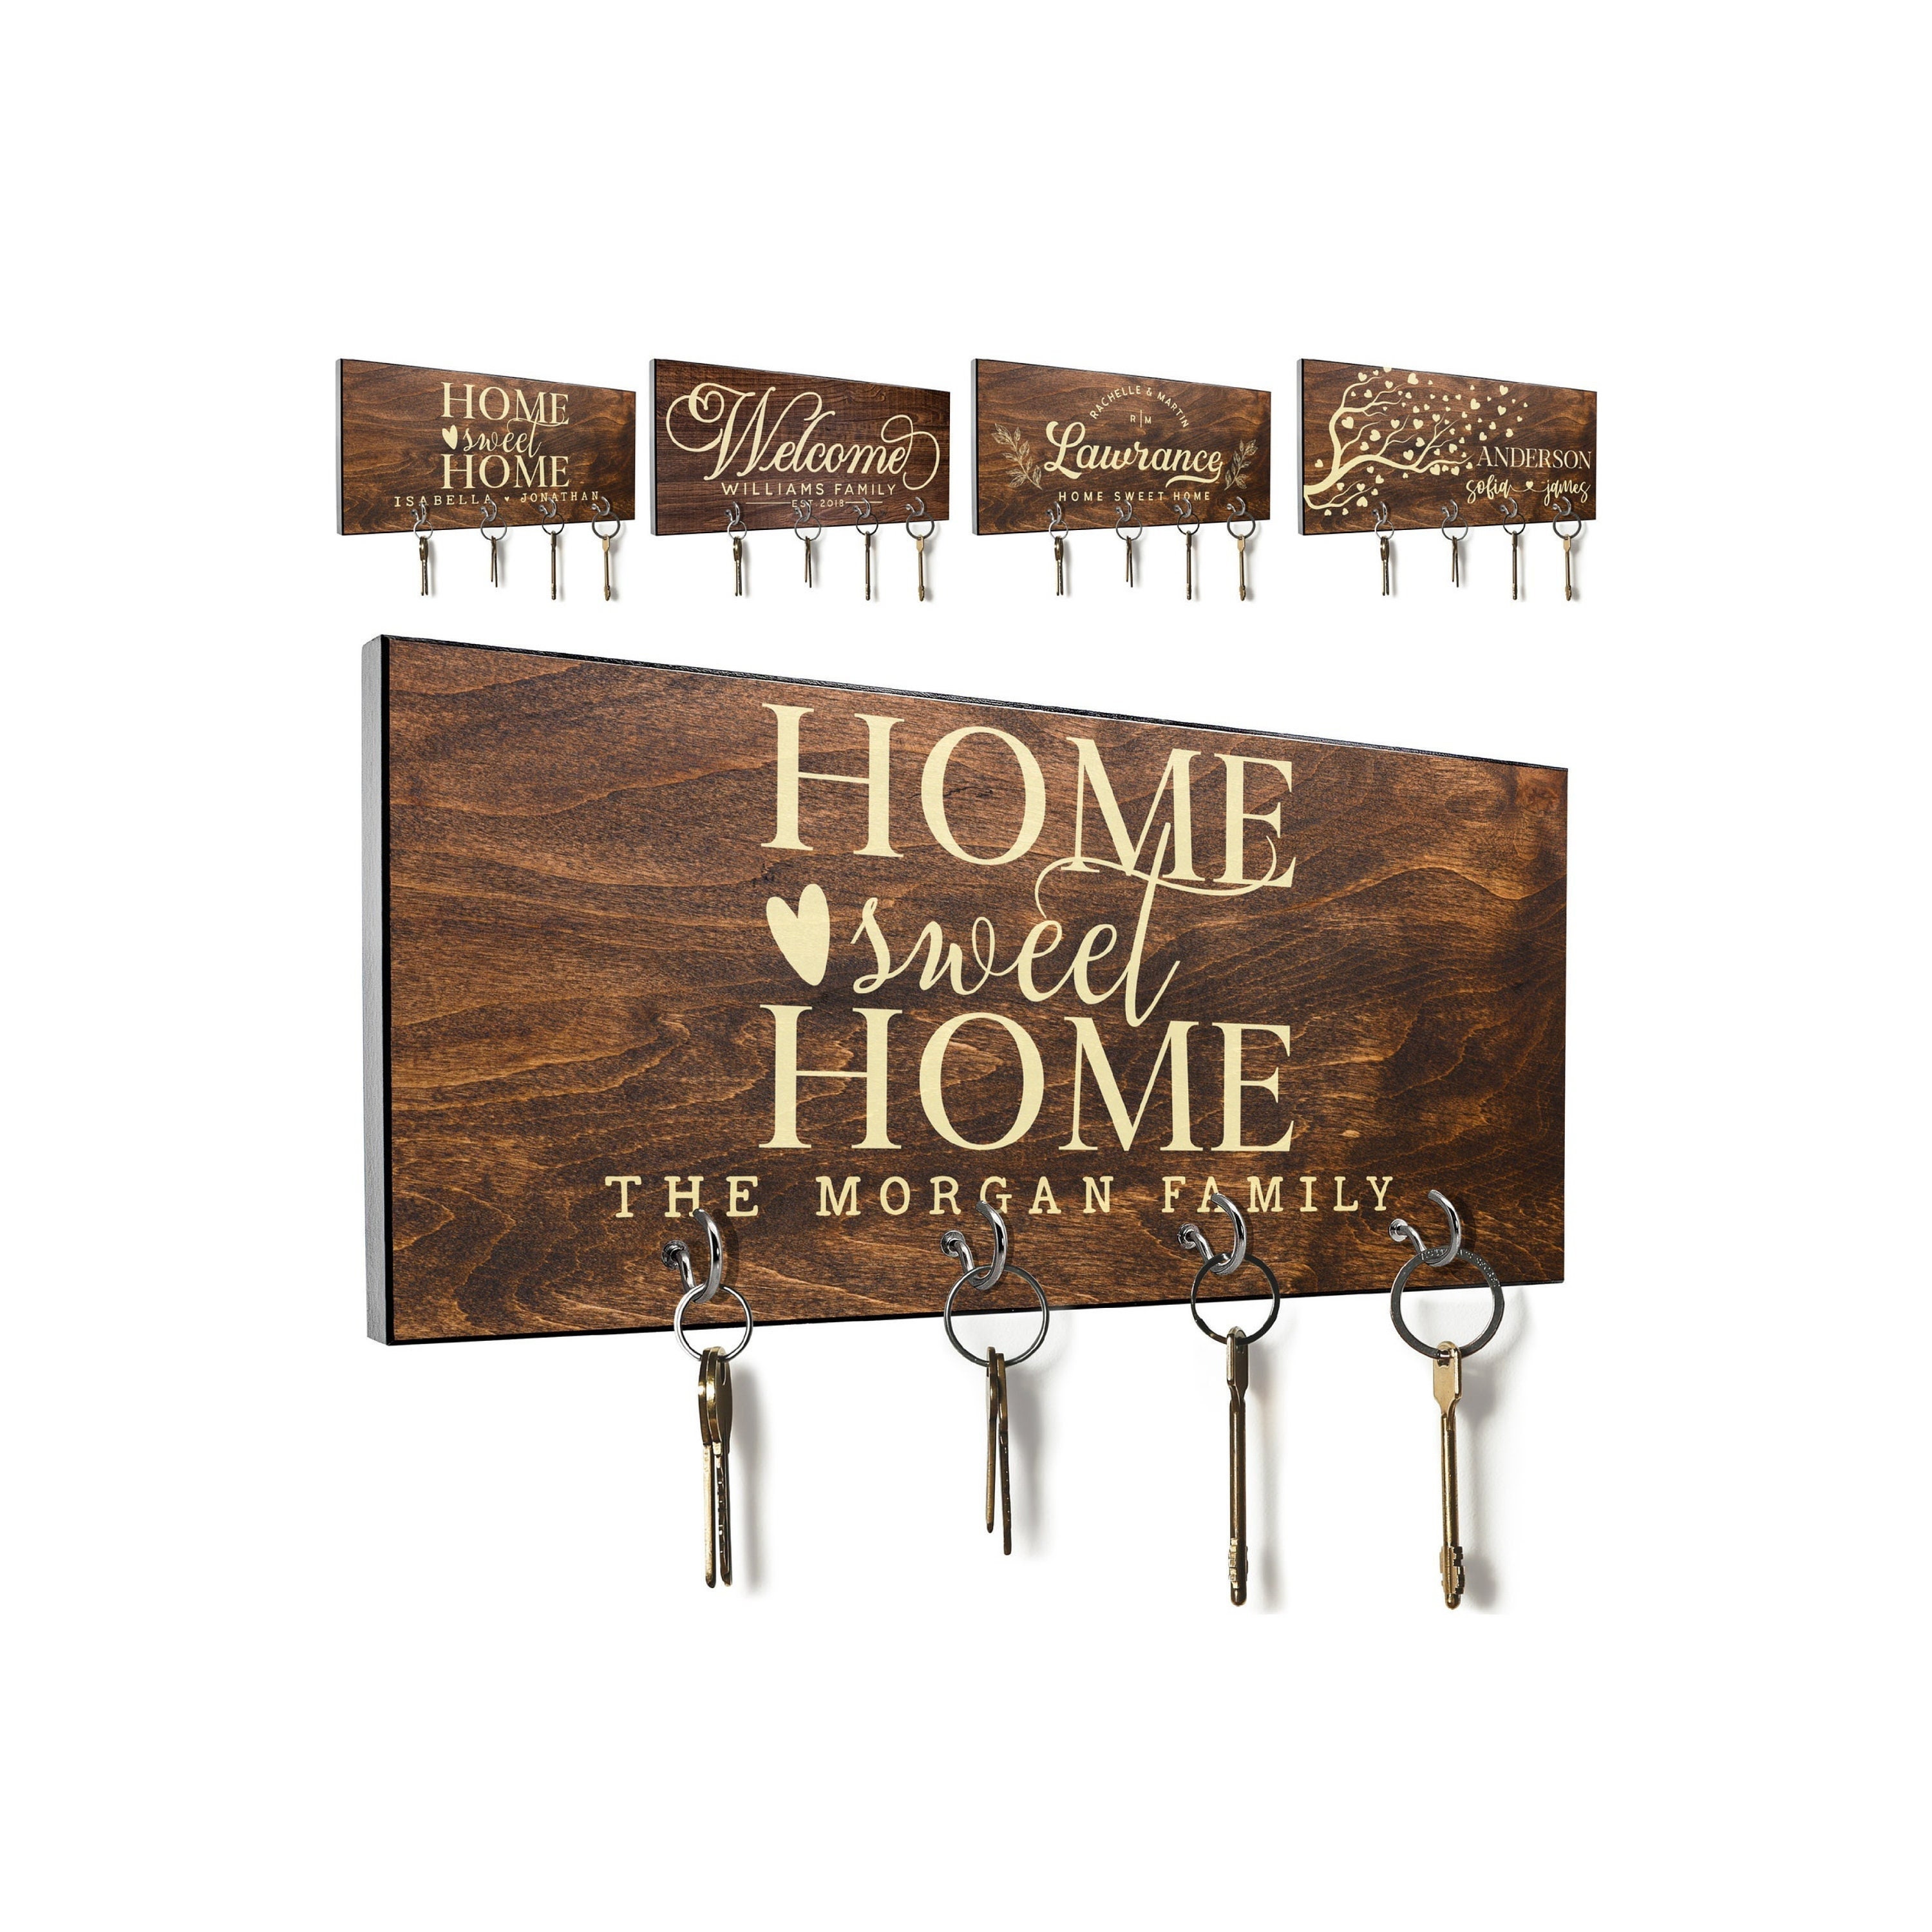 Home Sweet Home Personalized Key Ring Holder for Wall Key 